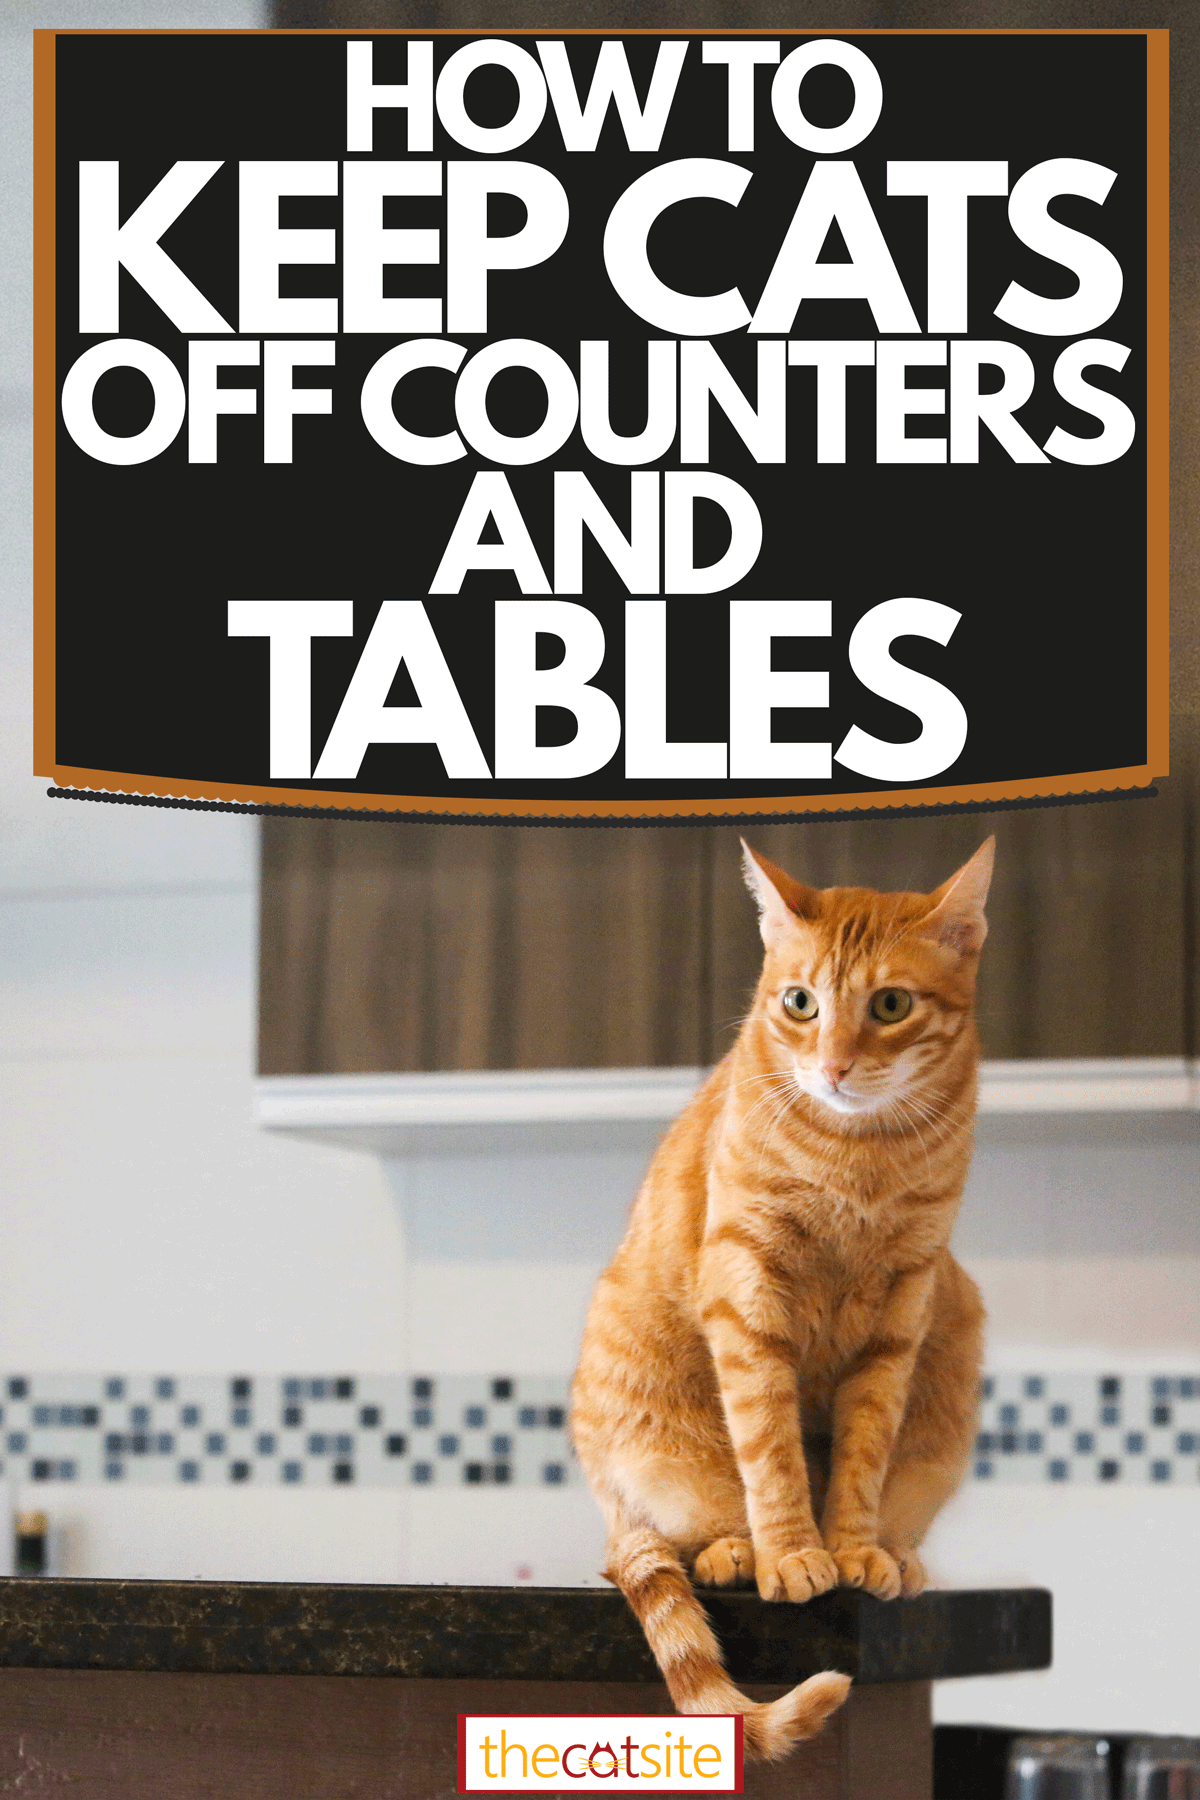 Red tabby cat on kitchen countertop - learn how to keep cats off the kitchen countertops